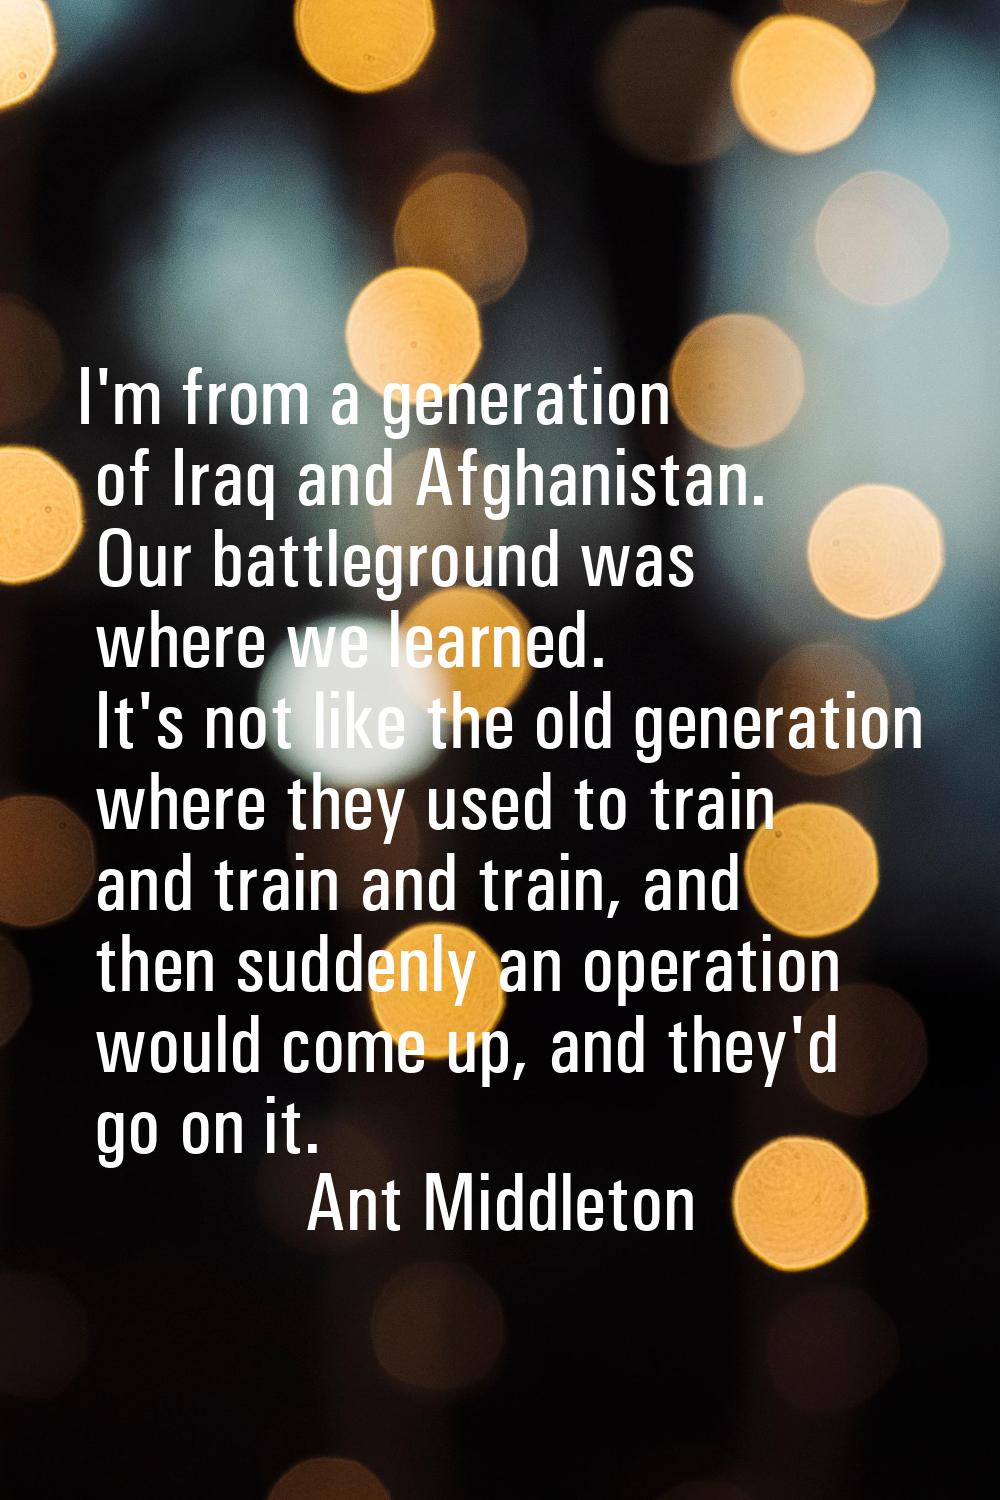 I'm from a generation of Iraq and Afghanistan. Our battleground was where we learned. It's not like